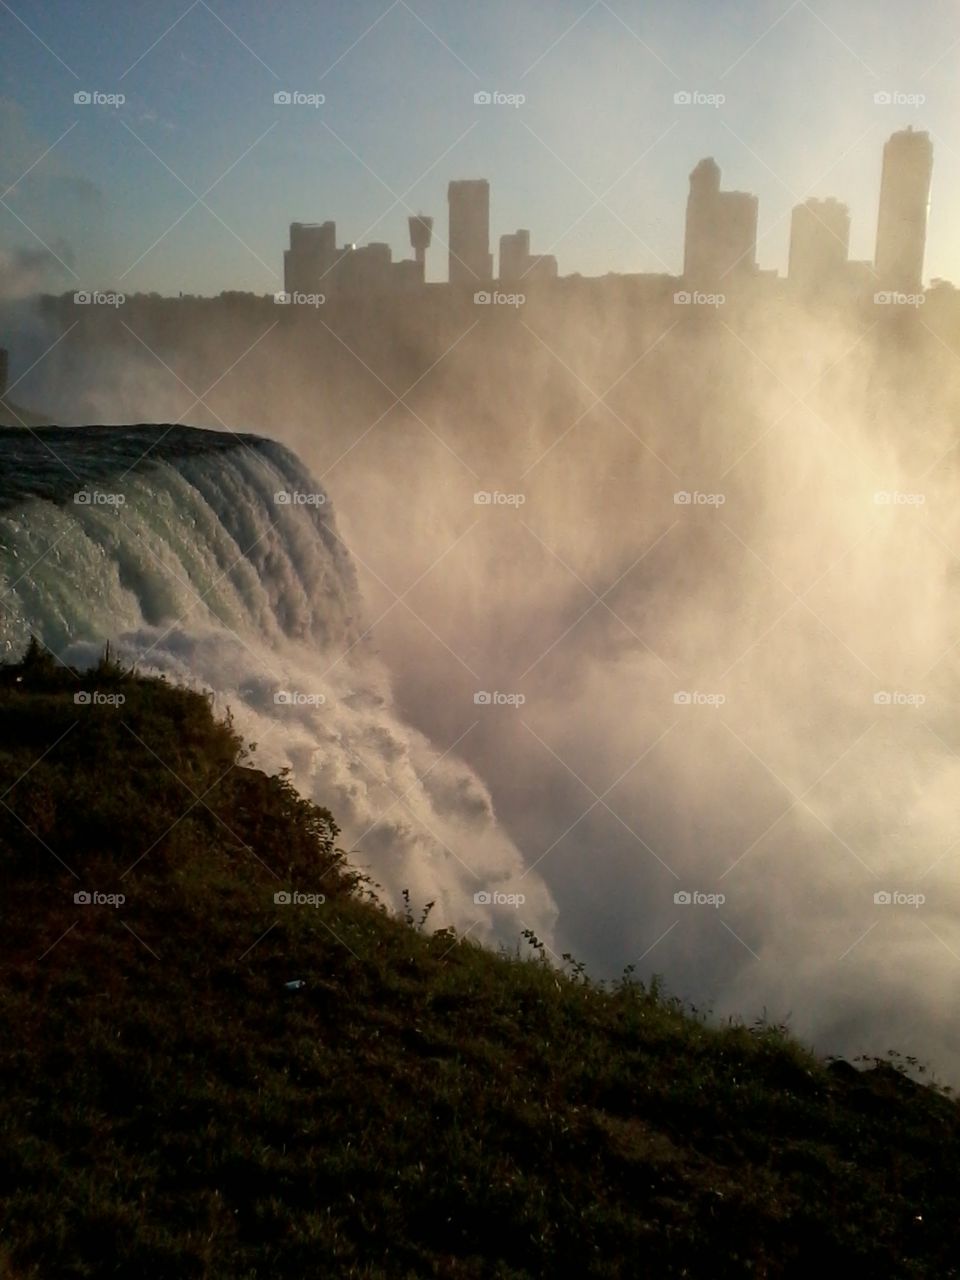 Skyline of Canada. Niagara Falls with Canada side in background beyond the mist.